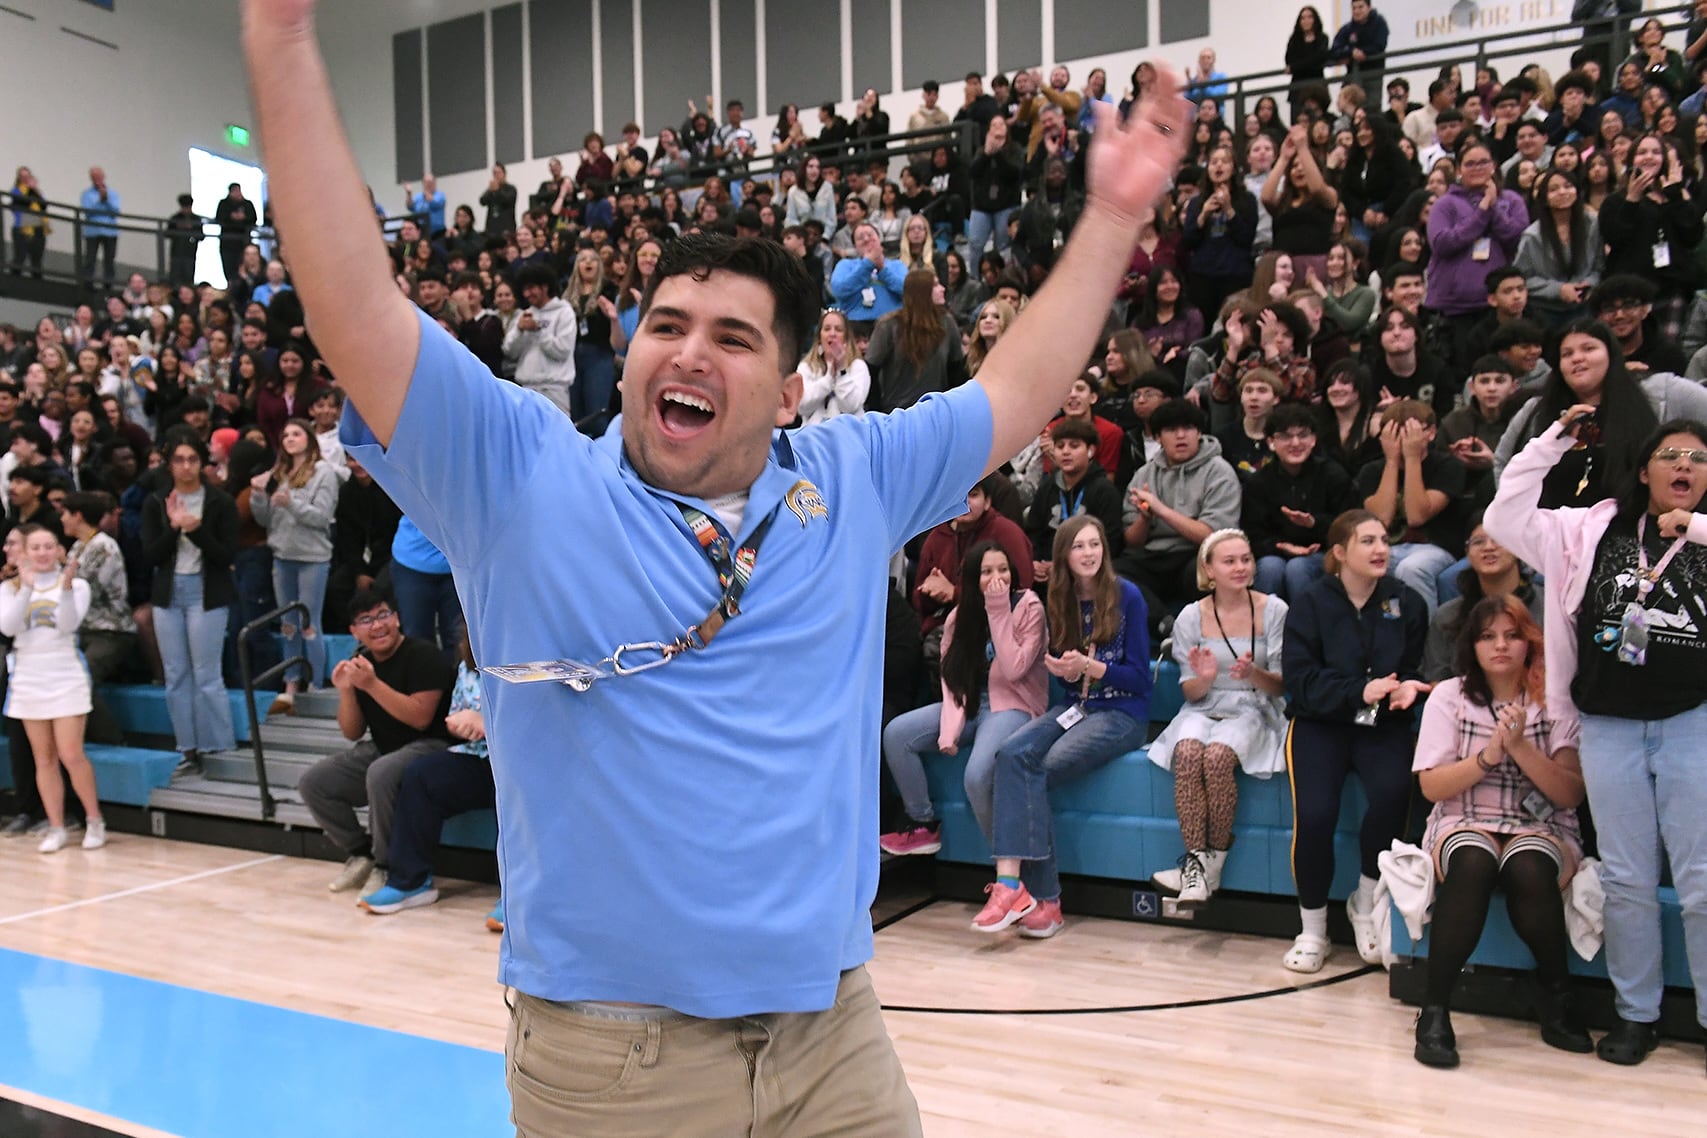 A man with short dark hair and wearing a blue t-shirt, waves his arms in the air while celebrating in a school gym with the bleachers full of people in the background.